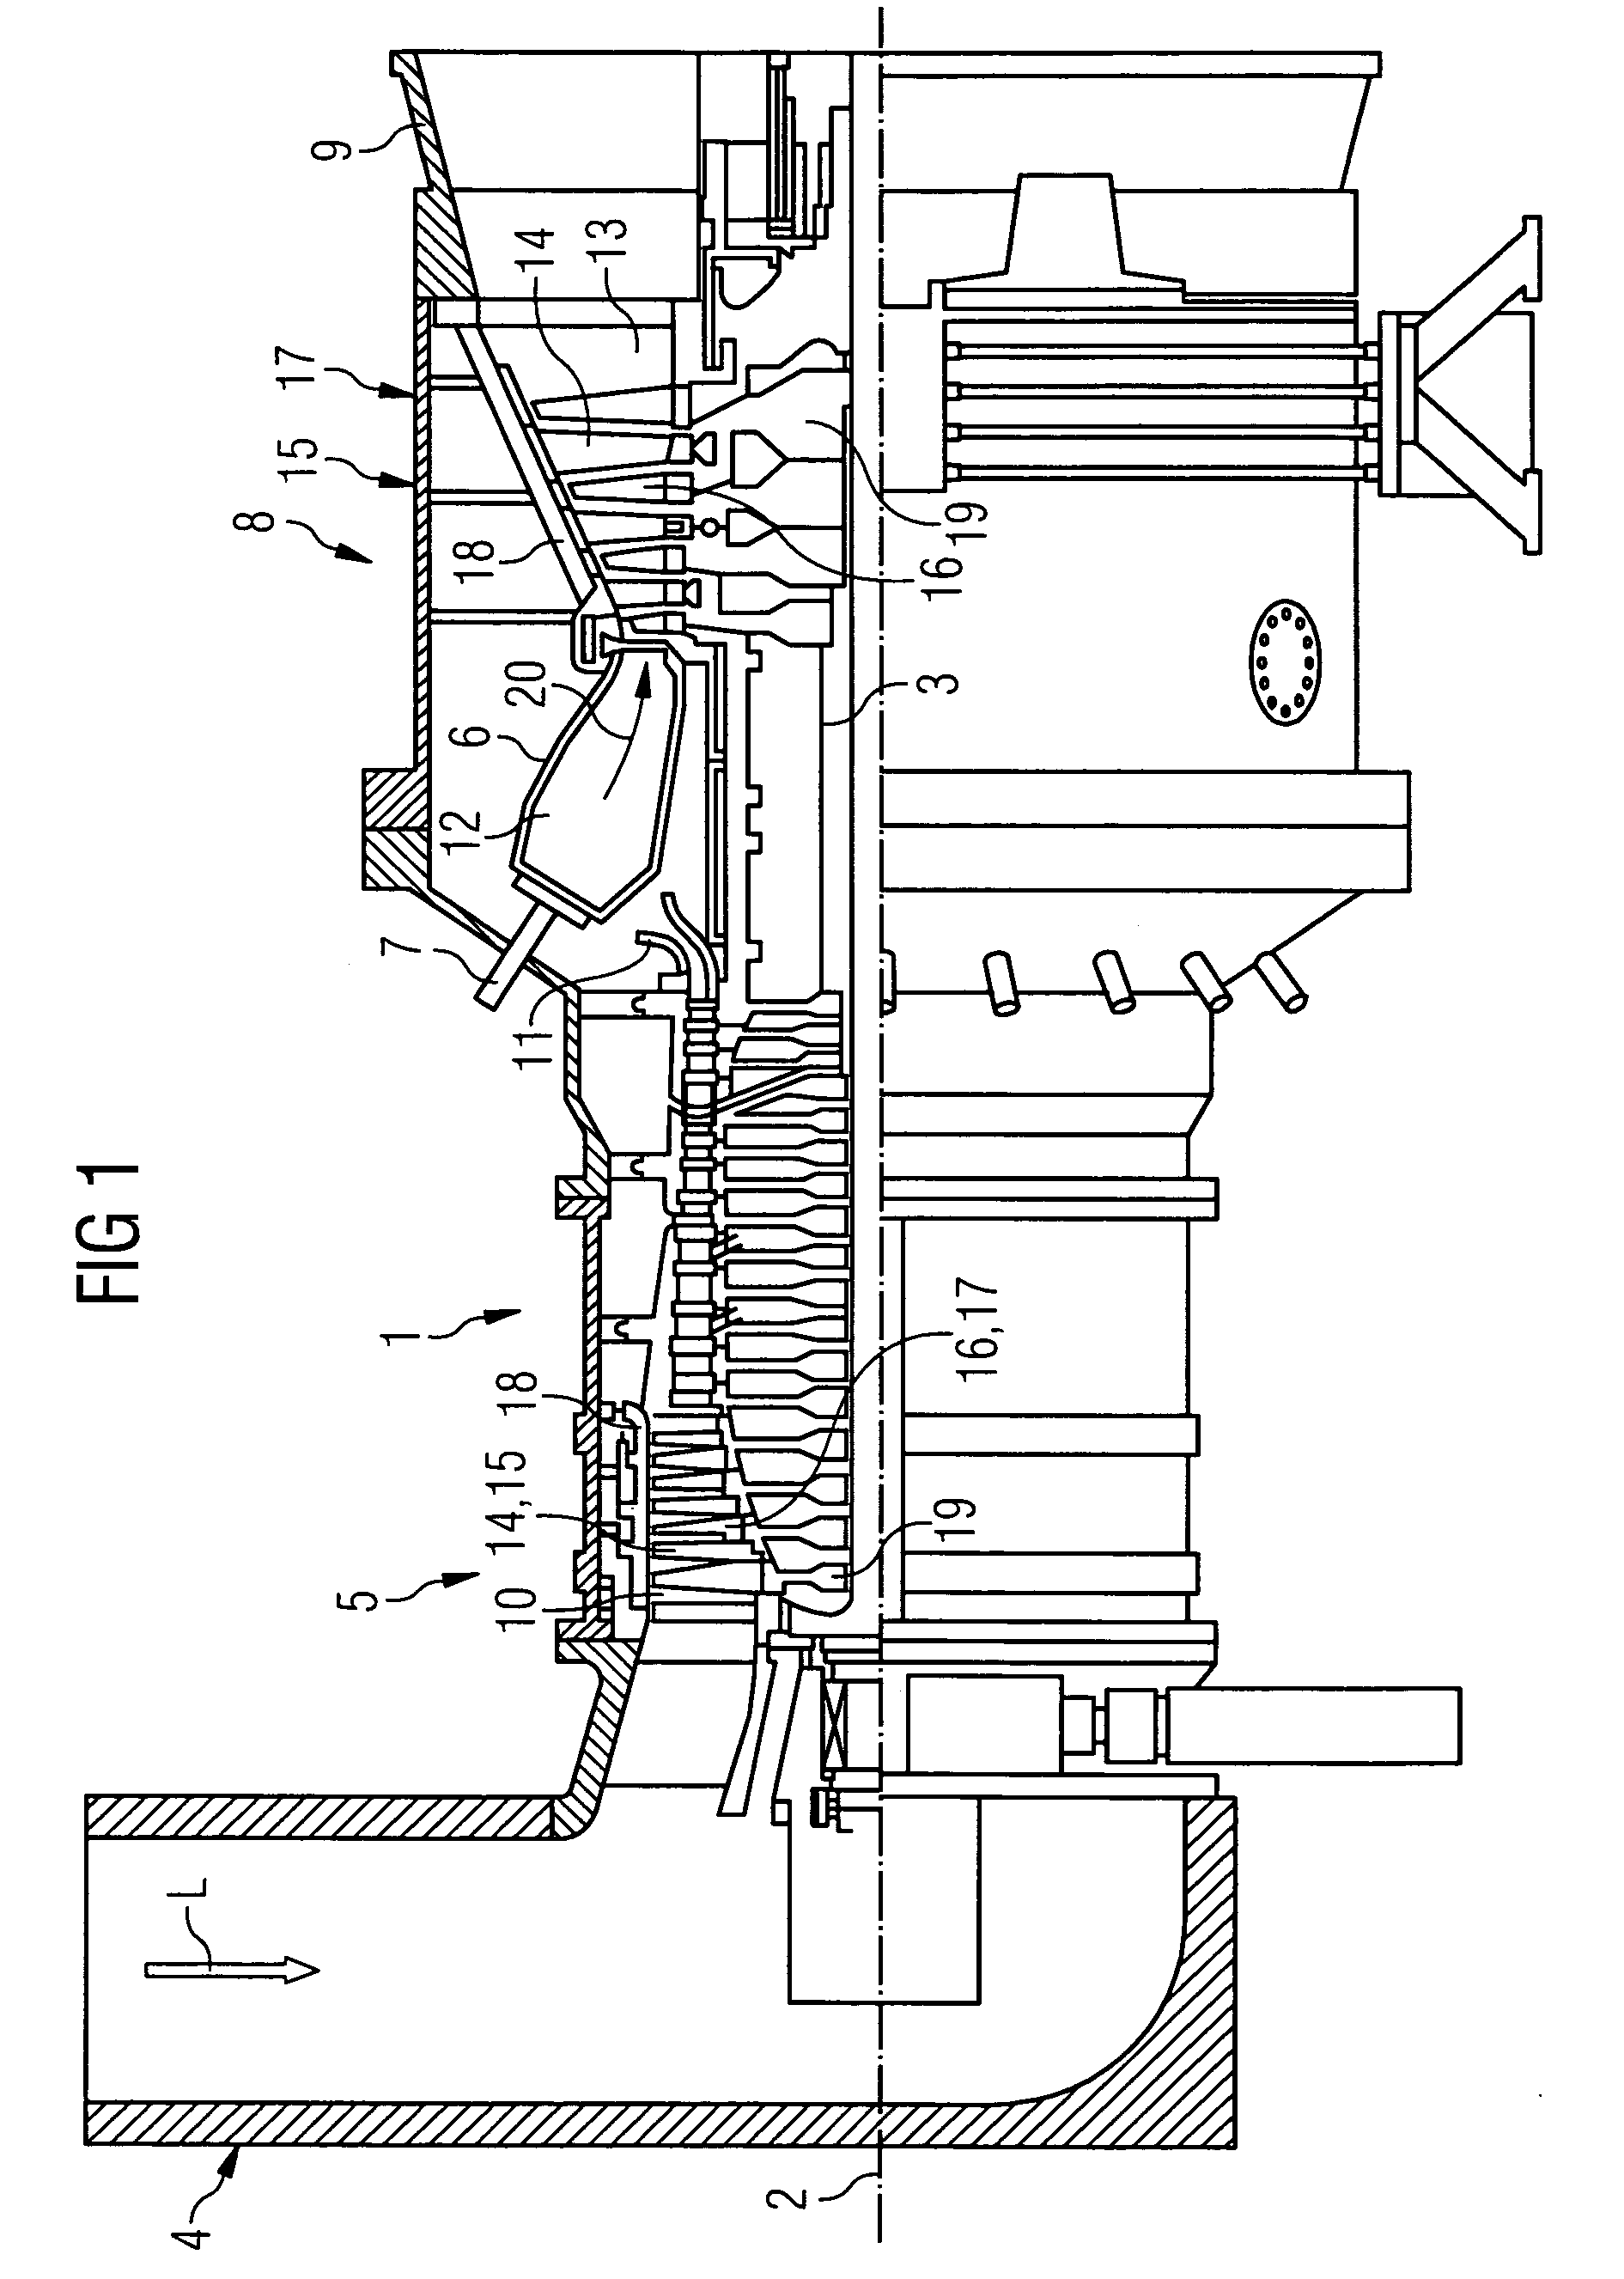 Cooling system for a gas turbine